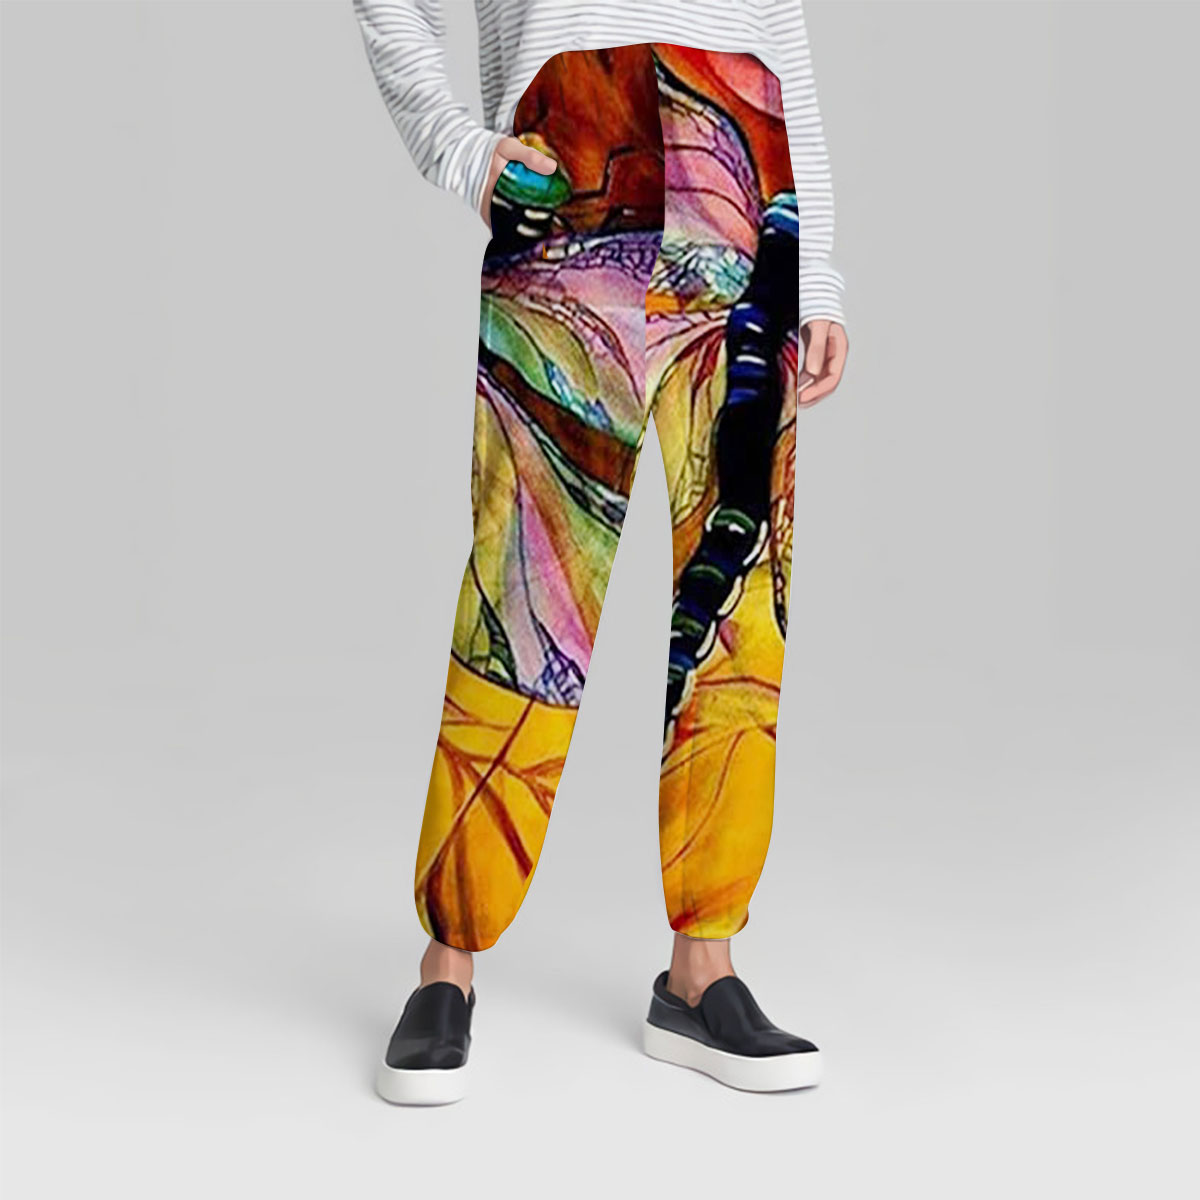 The Sunset Dragonfly Sweatpant